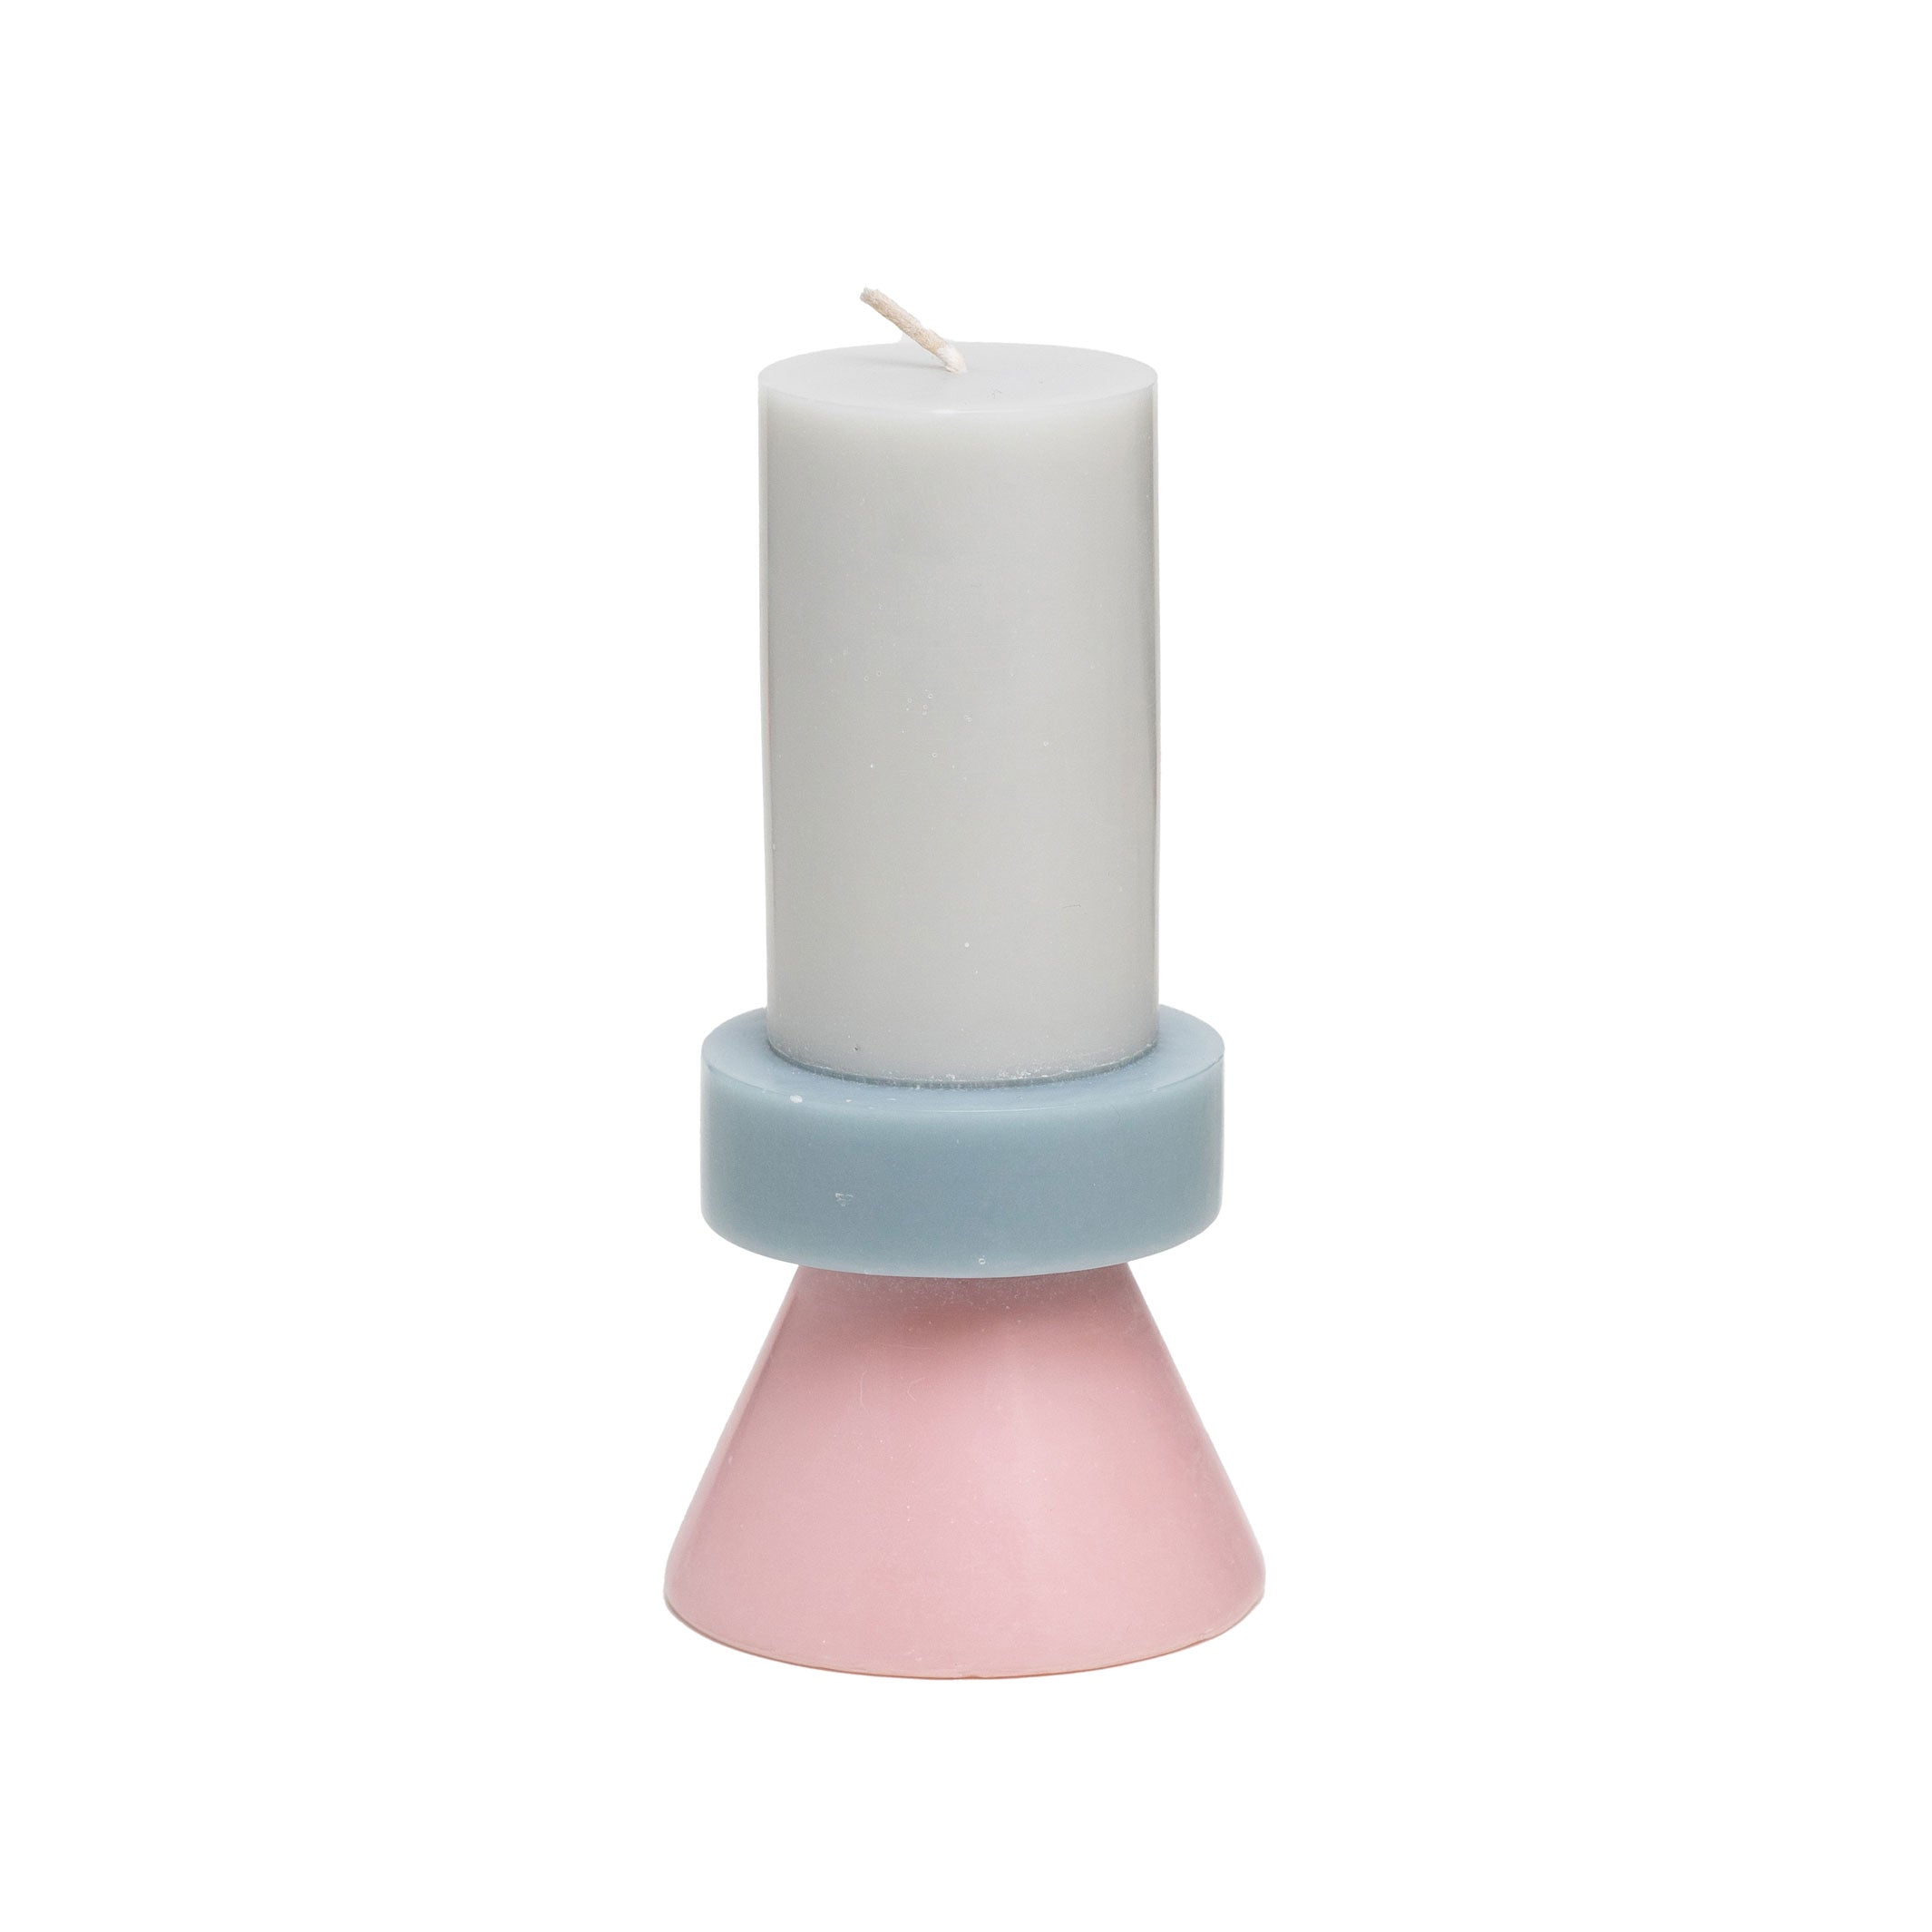 STACK CANDLE TALL | KERZE in Farben lightgrey-pastelblue-softpink | 30 Std. Brenndauer | YOD AND CO